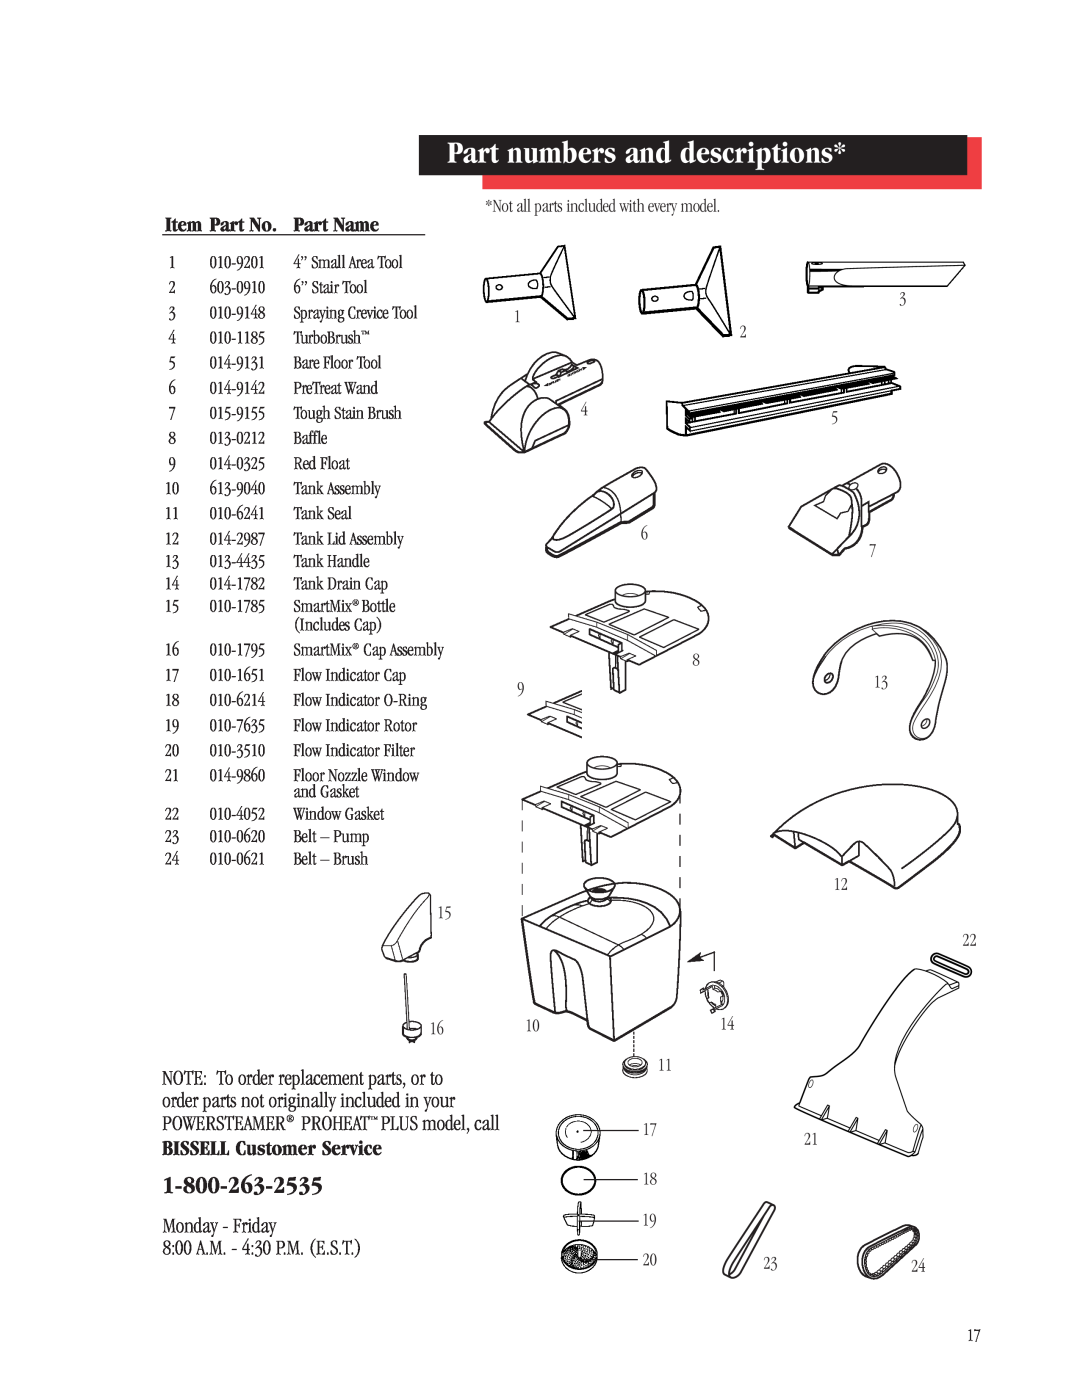 Bissell 1698 Part numbers and descriptions, Item Part No. Part Name, BISSELL Customer Service, 603-0910, 013-0212, Baffle 